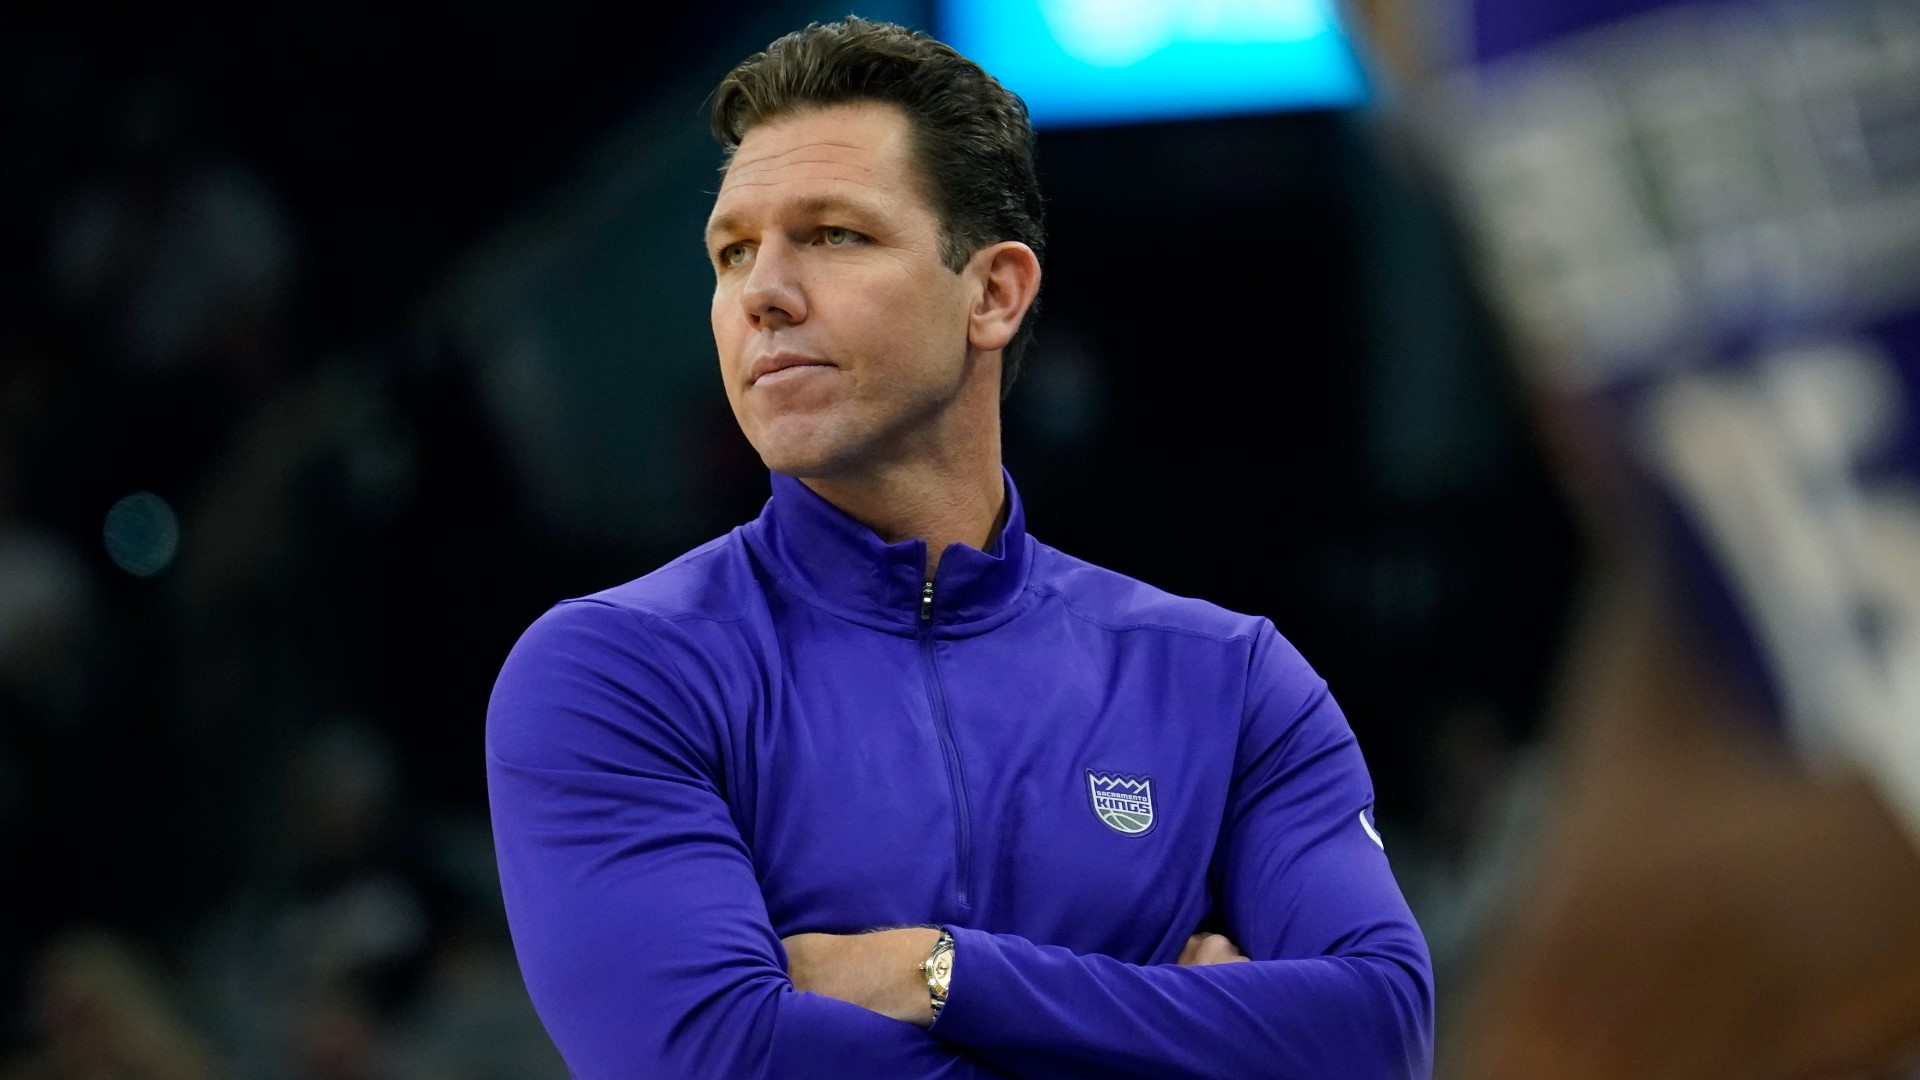 The Sacramento Kings fired coach Luke Walton after getting off to a disappointing start in his third season leading the team, ESPN first reported Sunday.